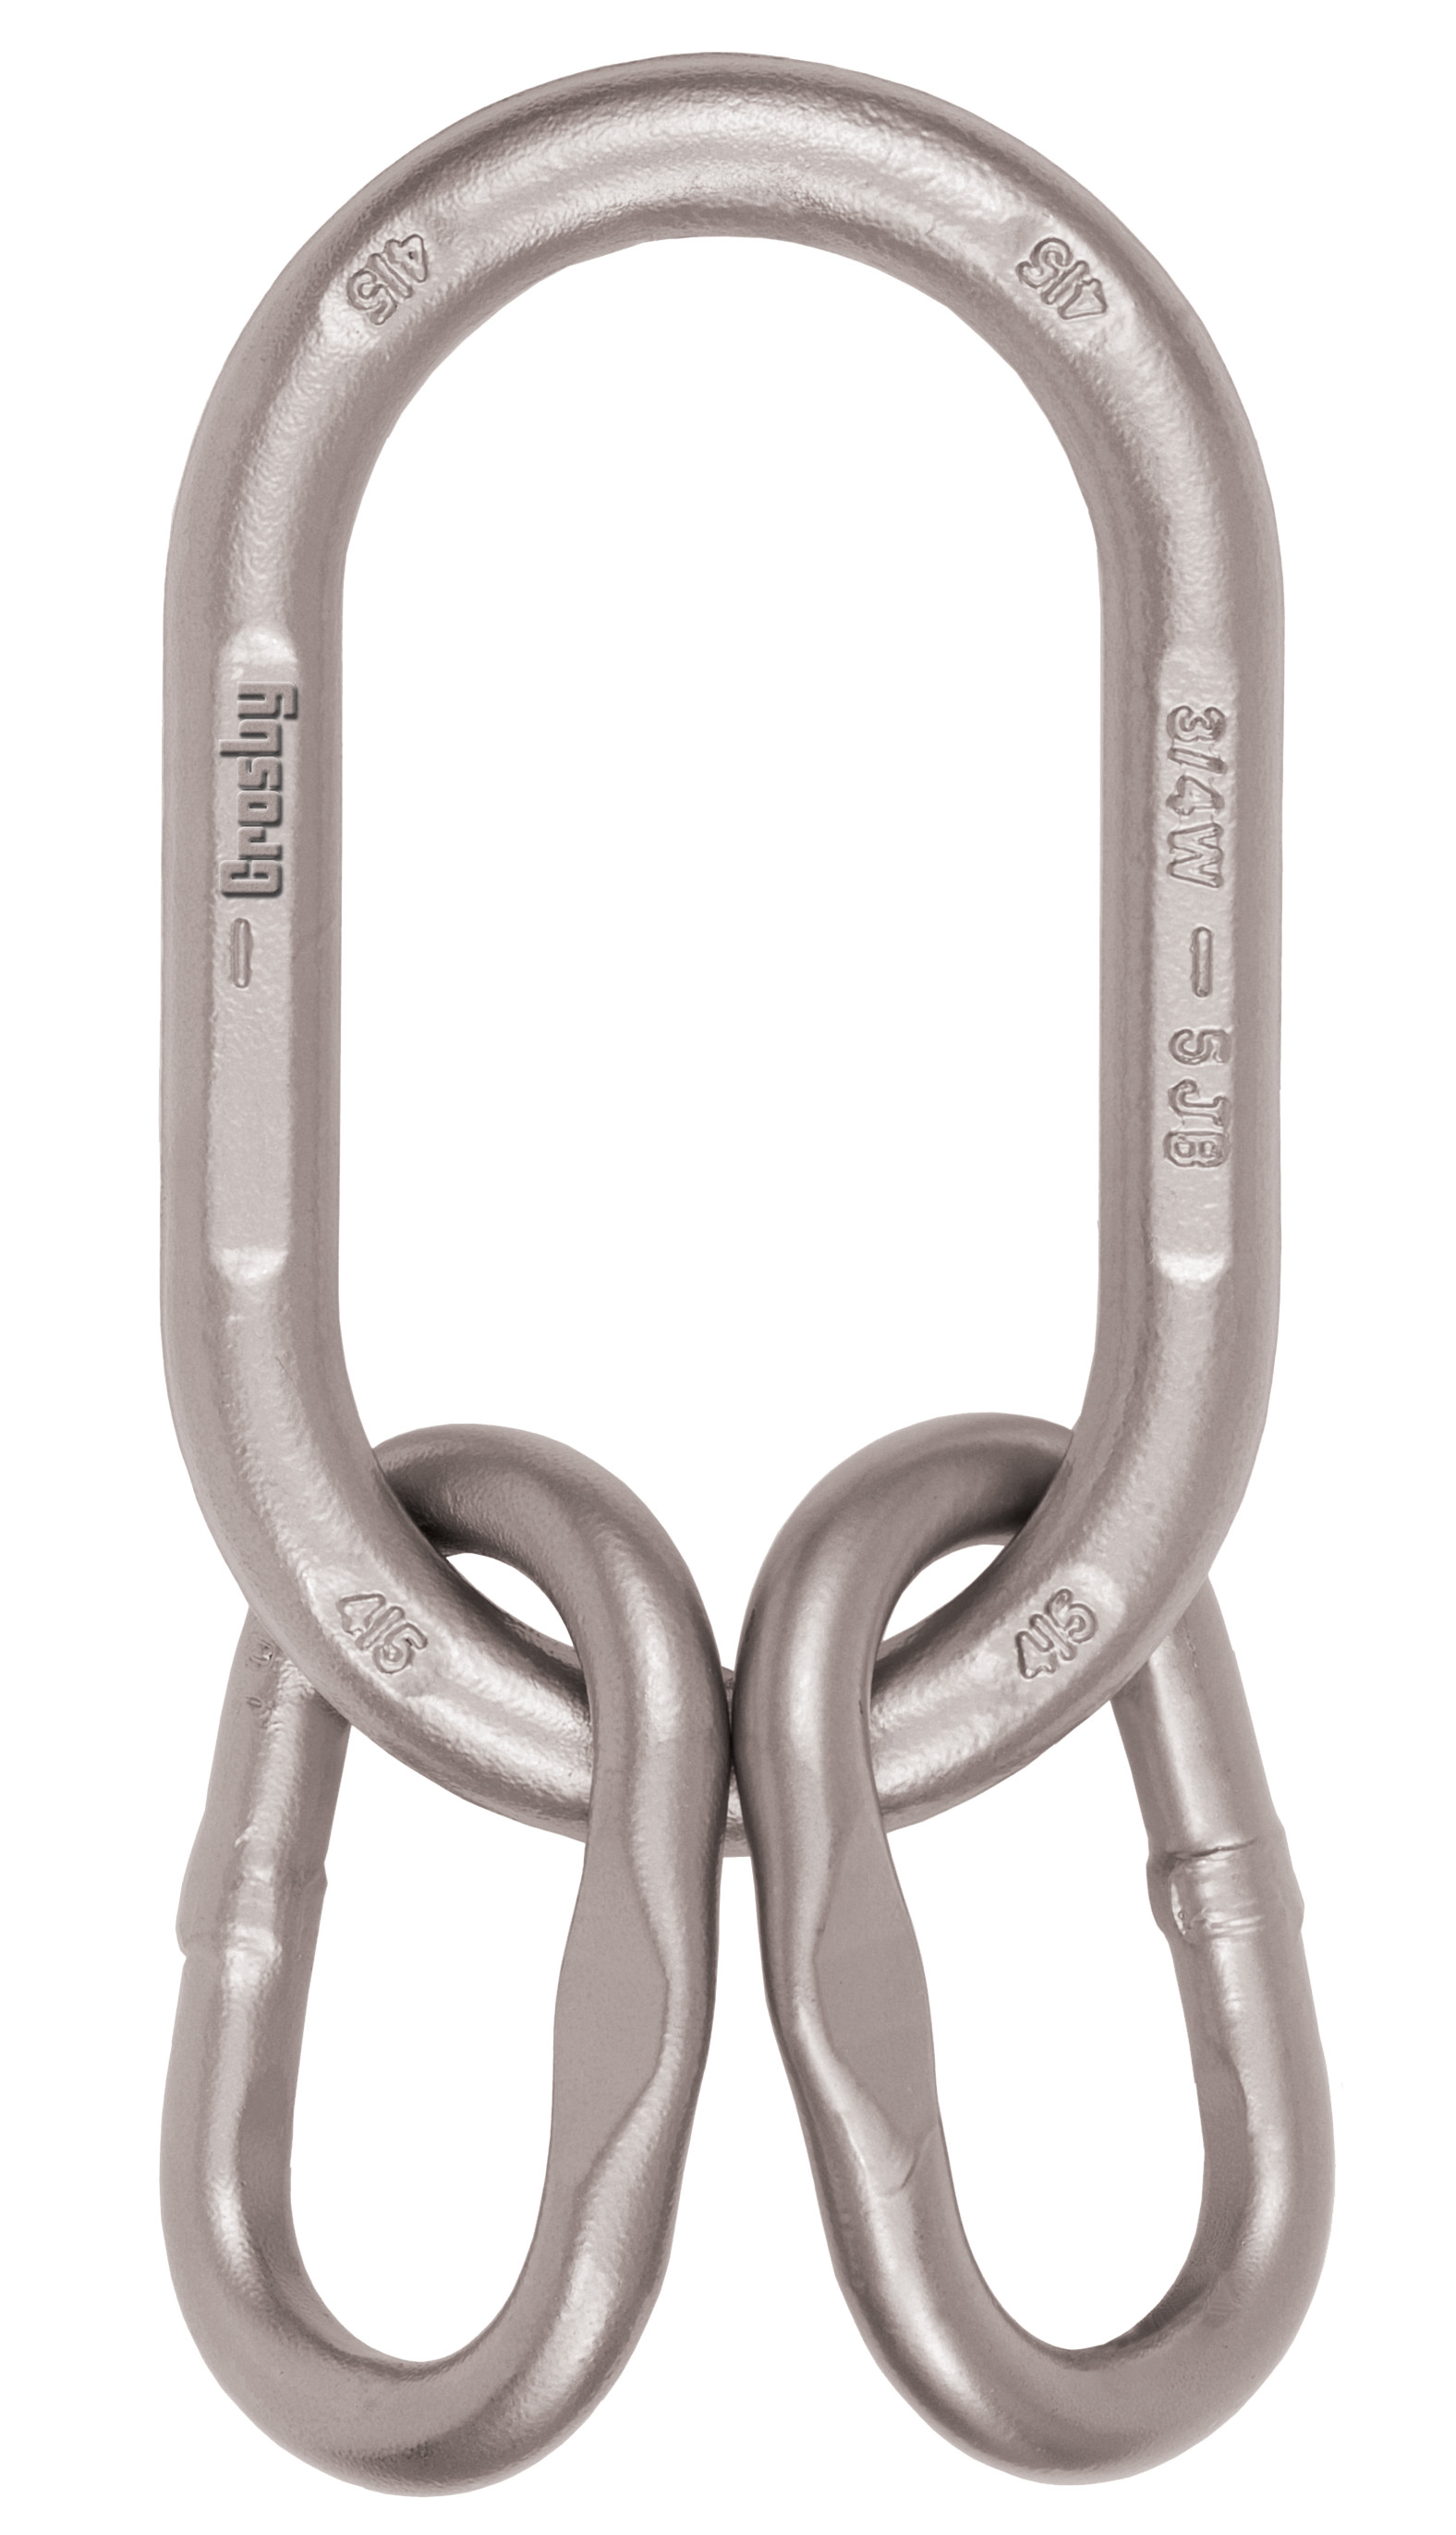 Crosby A-345 Oblong Master Links image